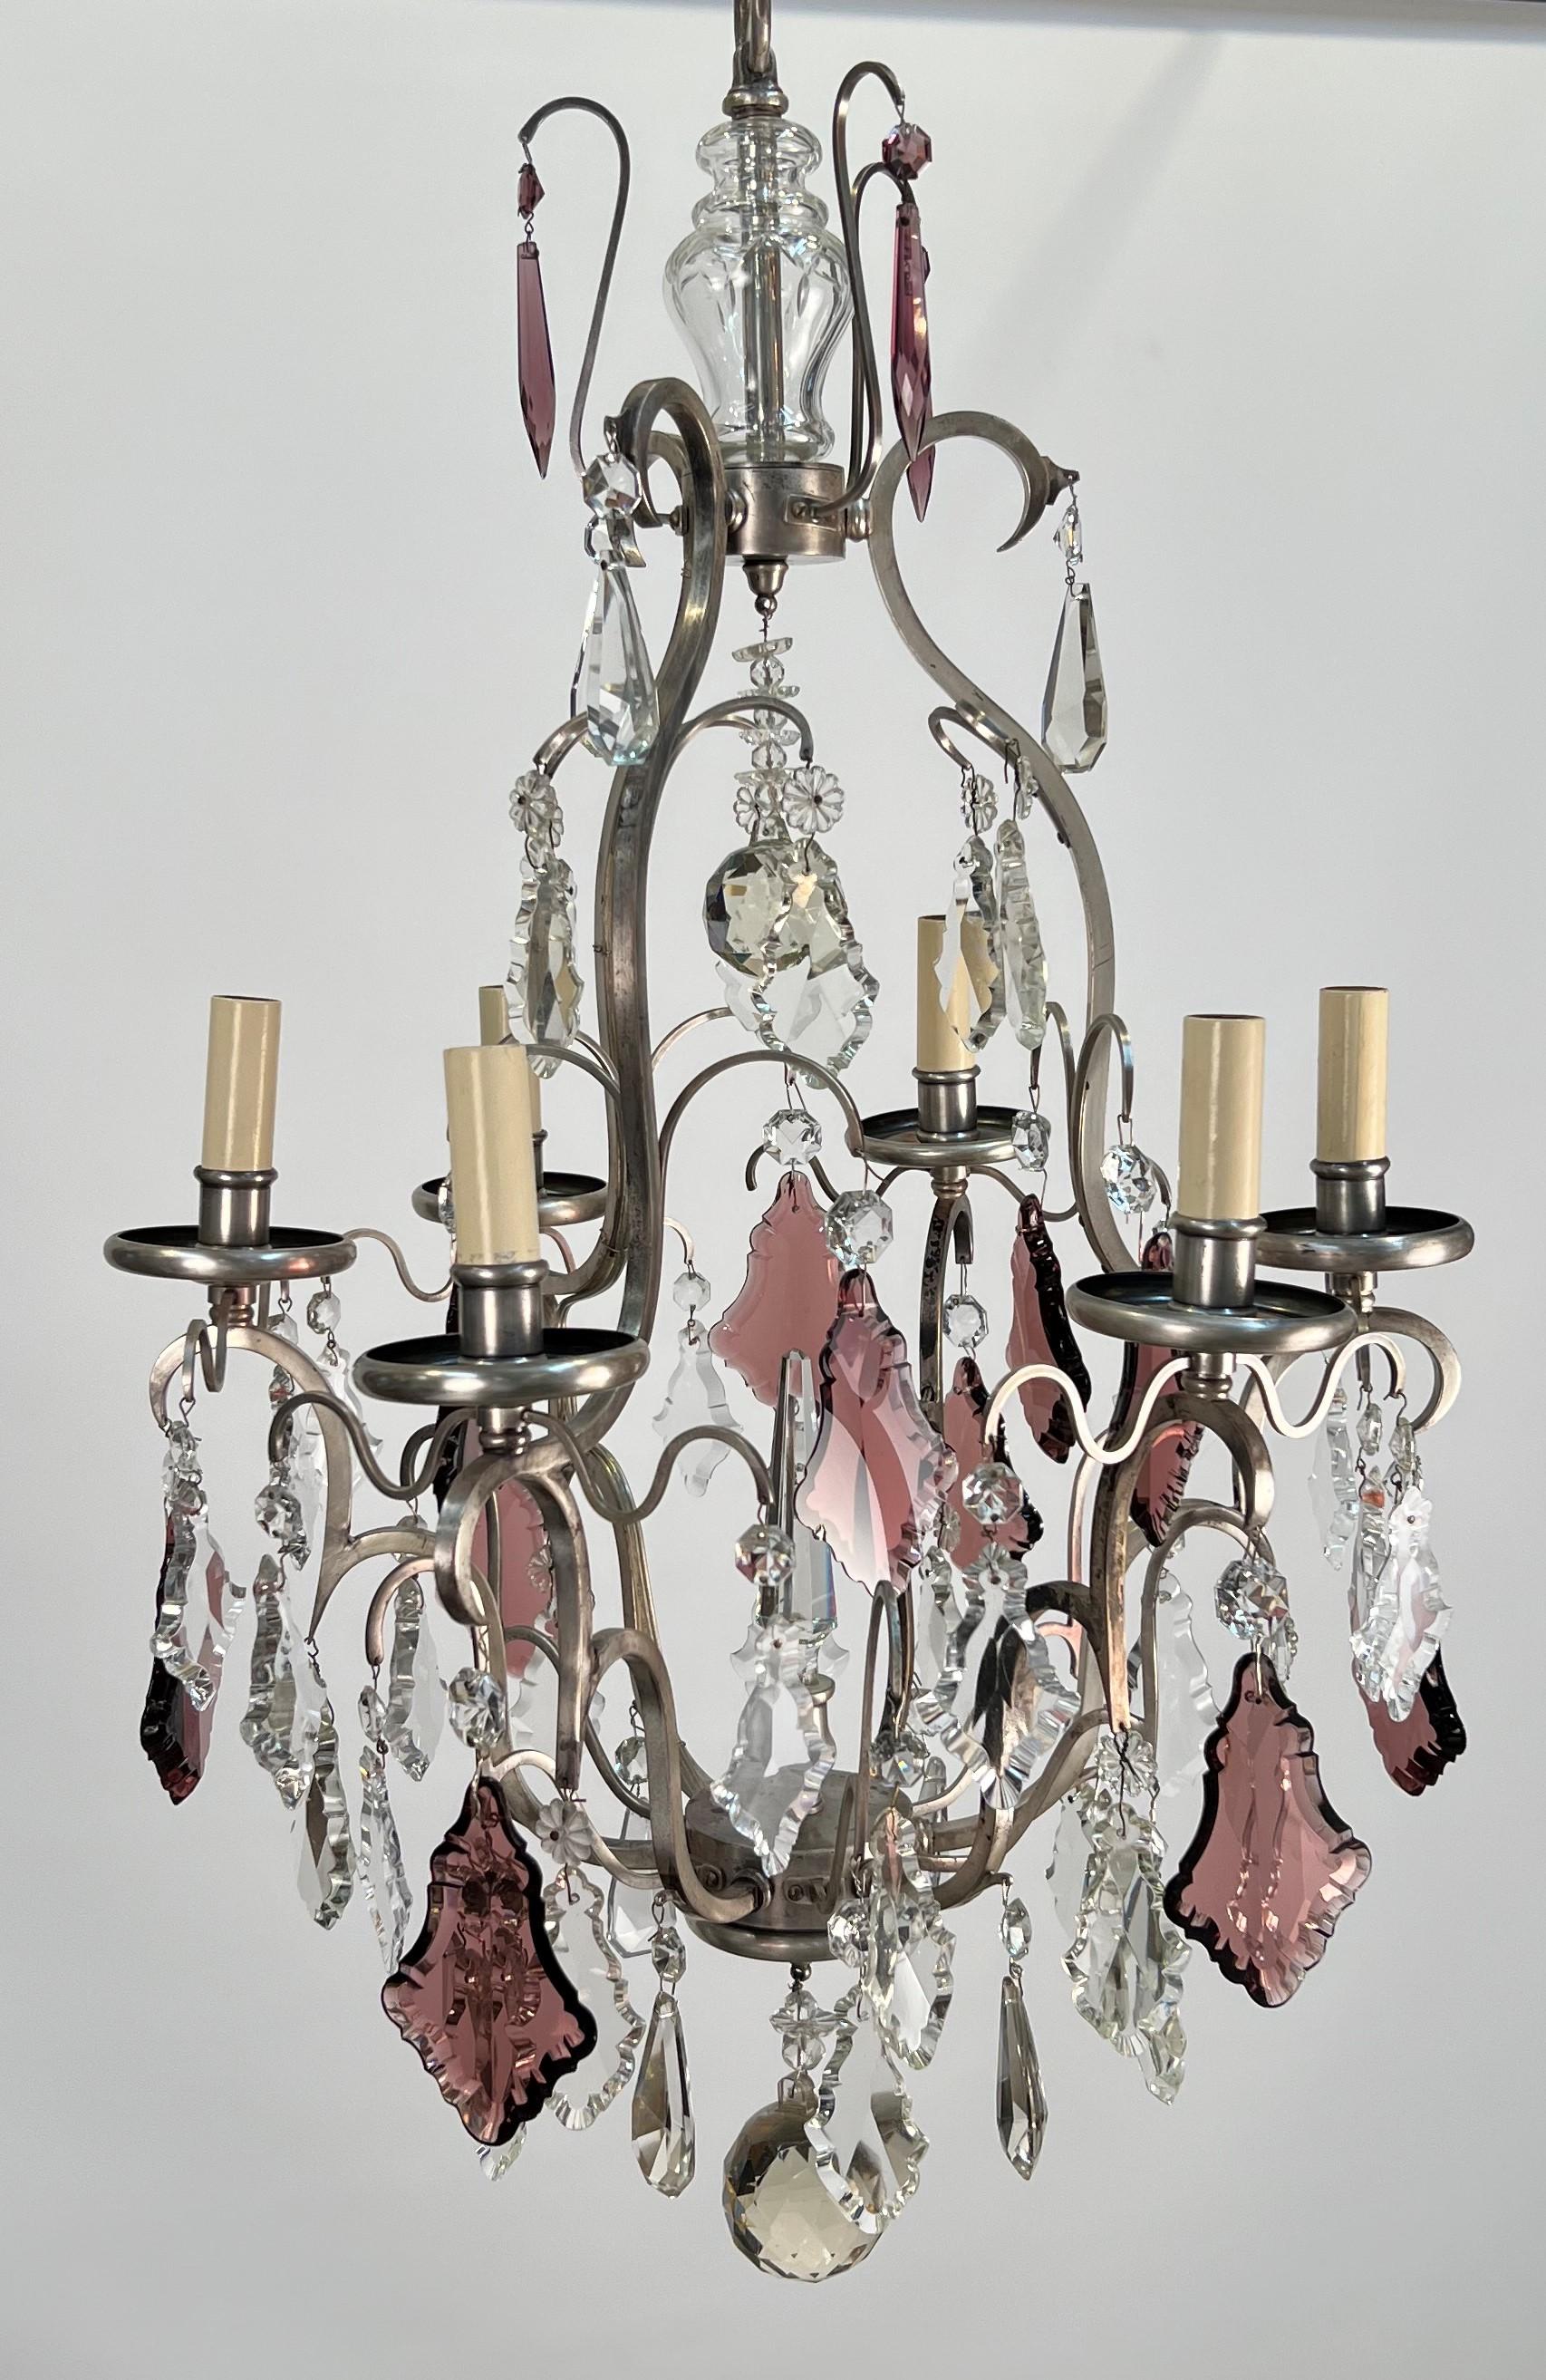 A handsome 20th century Italian silvered bronze & crystal Louis XVI style chandelier featuring amethyst accent crystals. The silvered bronze has developed a nice and uneven patina. From the photos one can see varying degrees of un-evened darkened